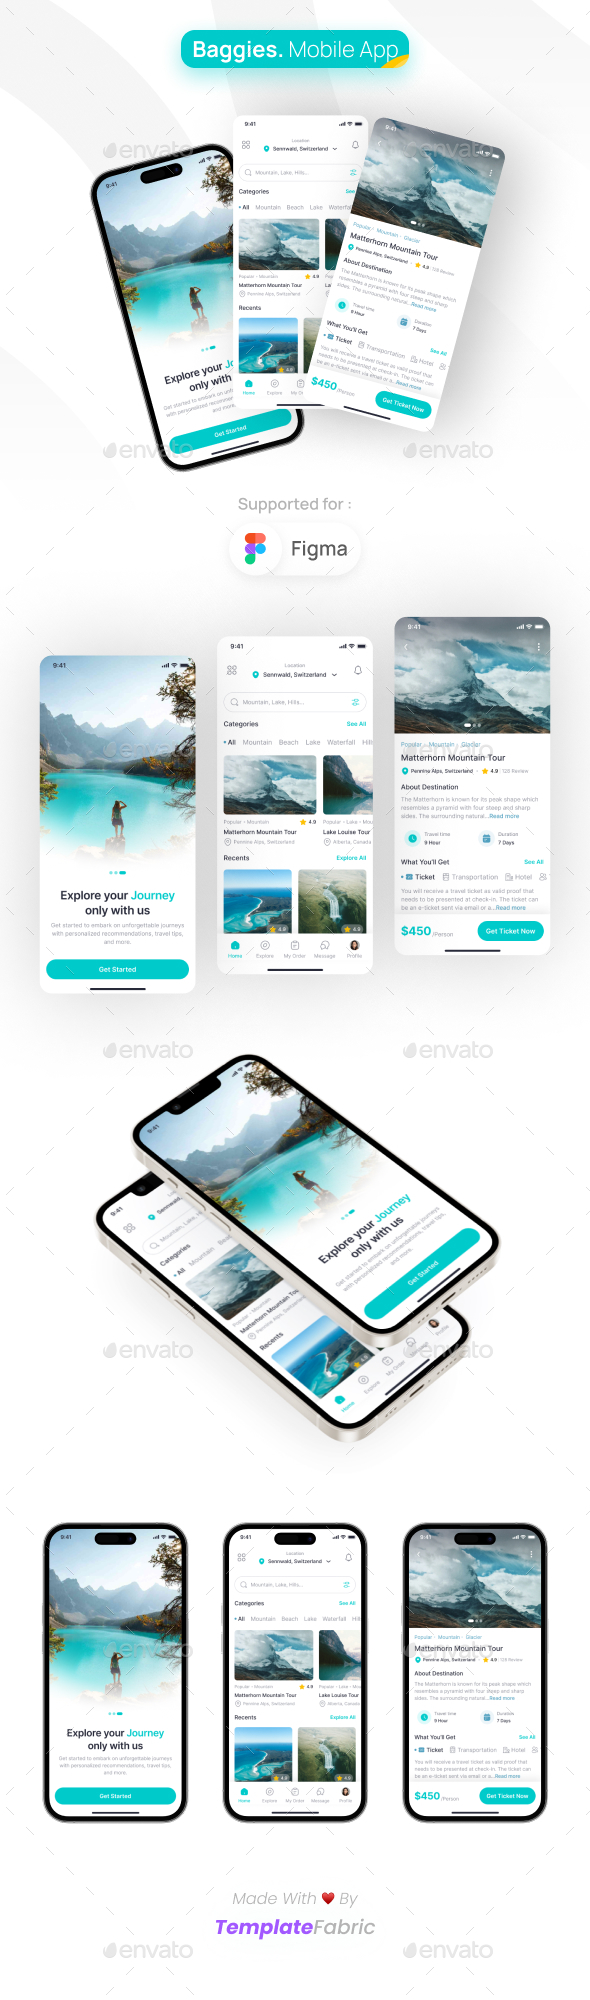 [DOWNLOAD]Triphy - Travel Agency Mobile App UI Kit